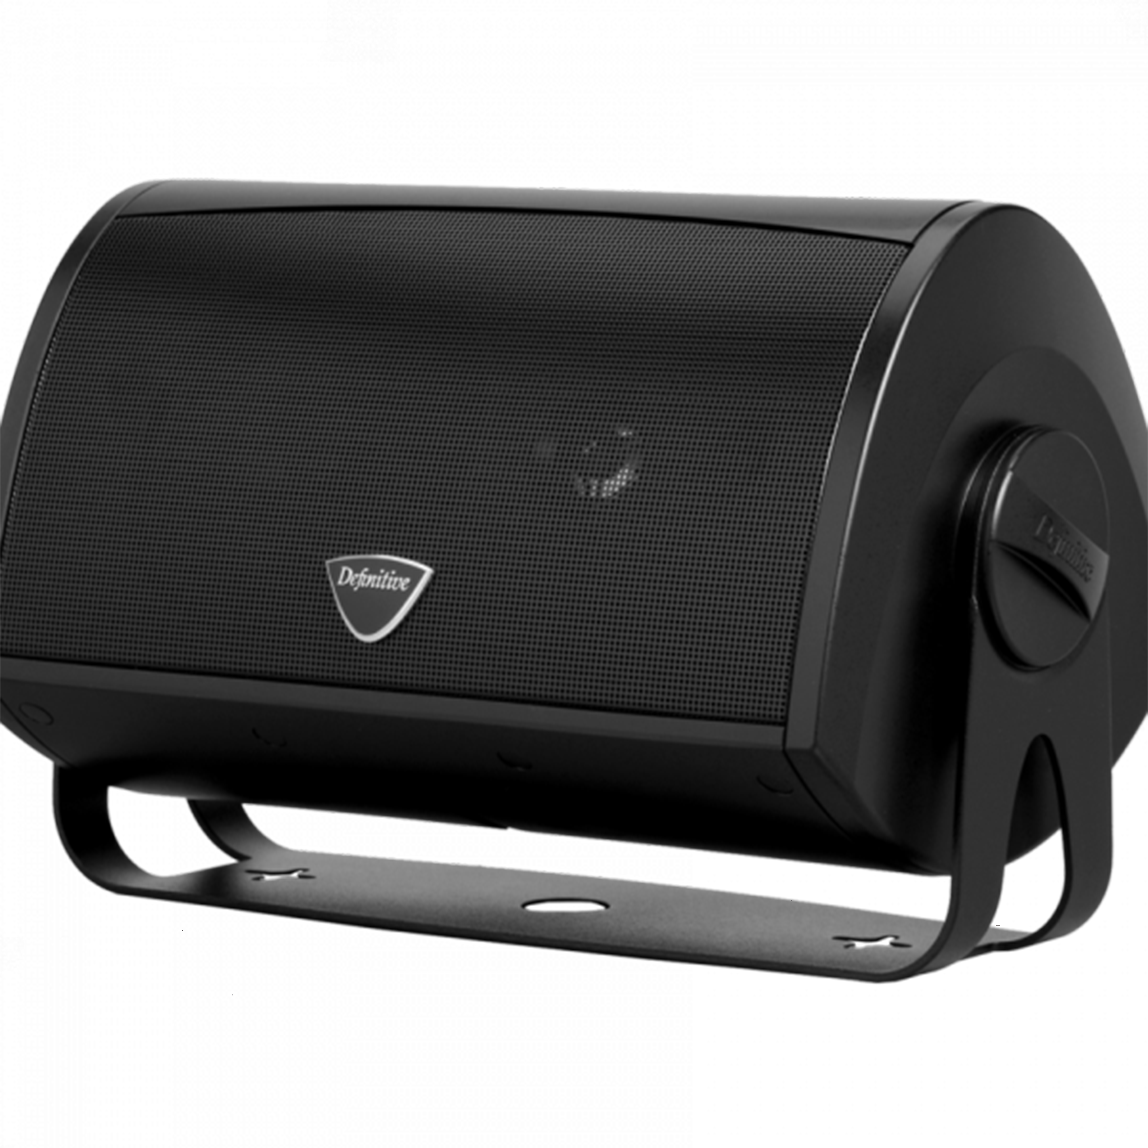 Definitive Technology AW6500 6.5'' All Weather Speaker (Pair)